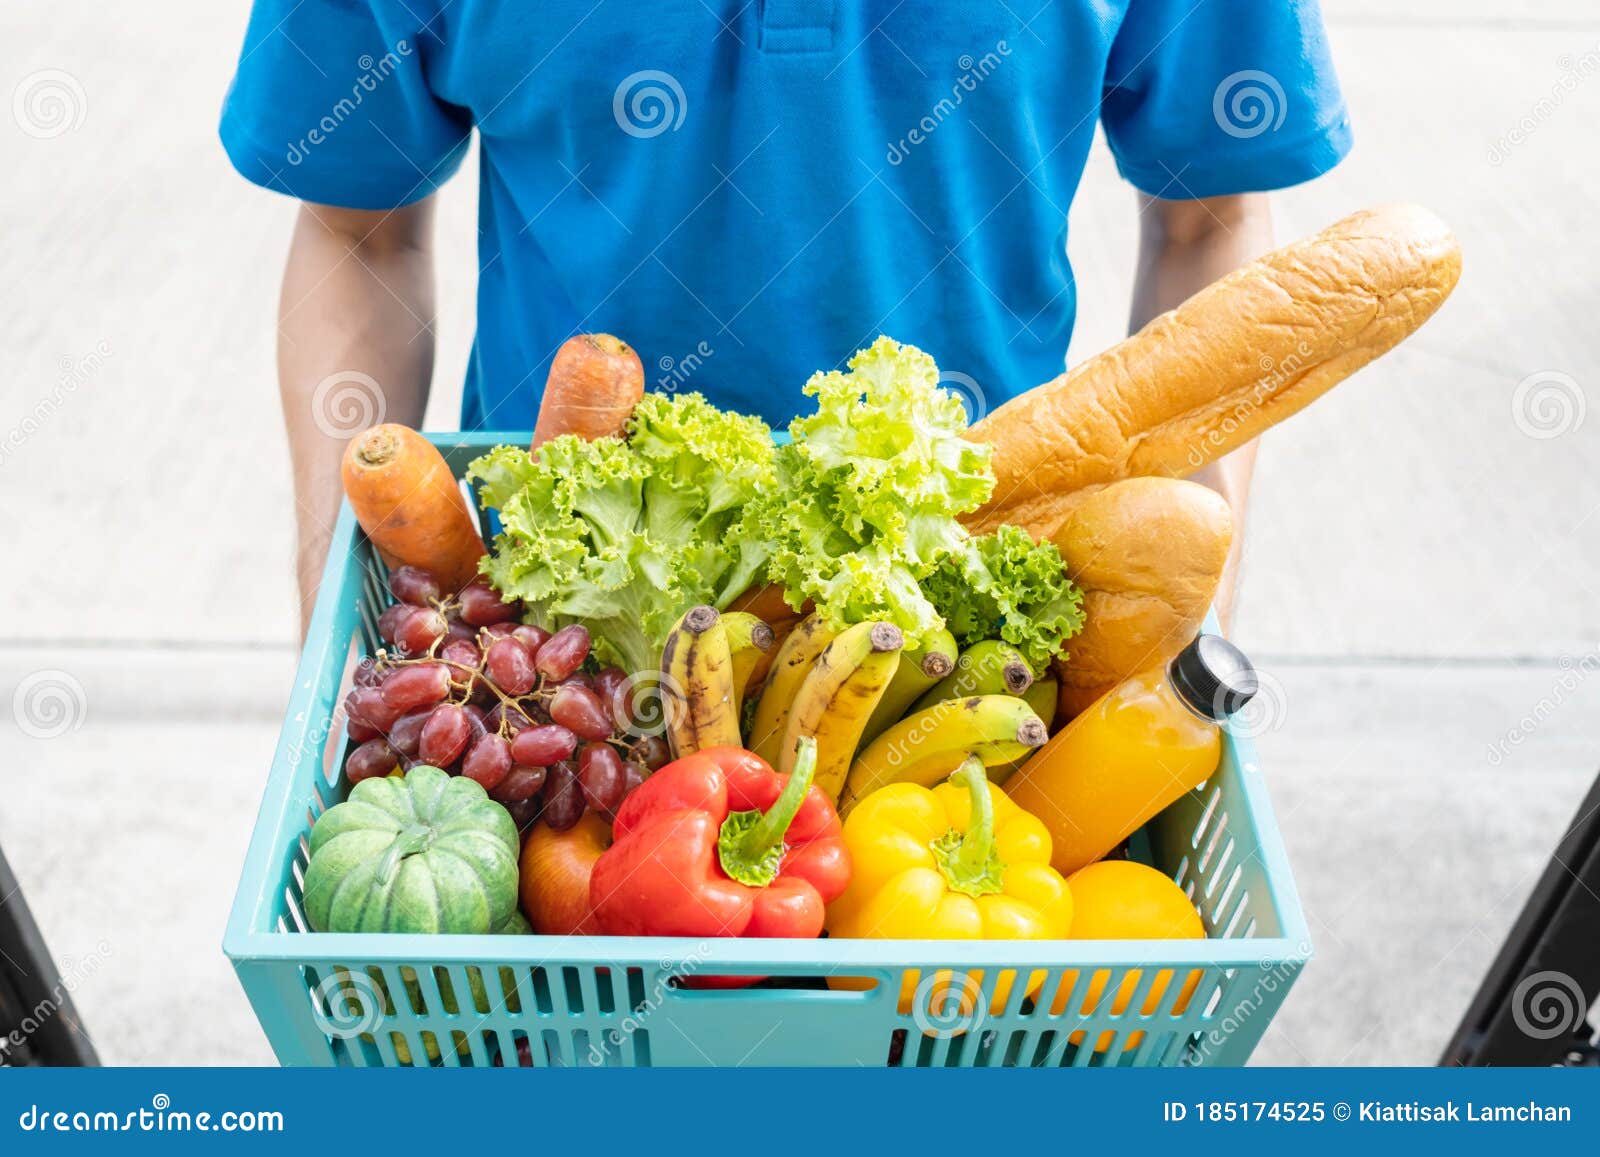 Happy Woman Wearing Mask Holding Basket Fruit, Vegetable Fresh Groceries  from Delivery Healthy Food Stock Image - Image of asian, front: 185174525